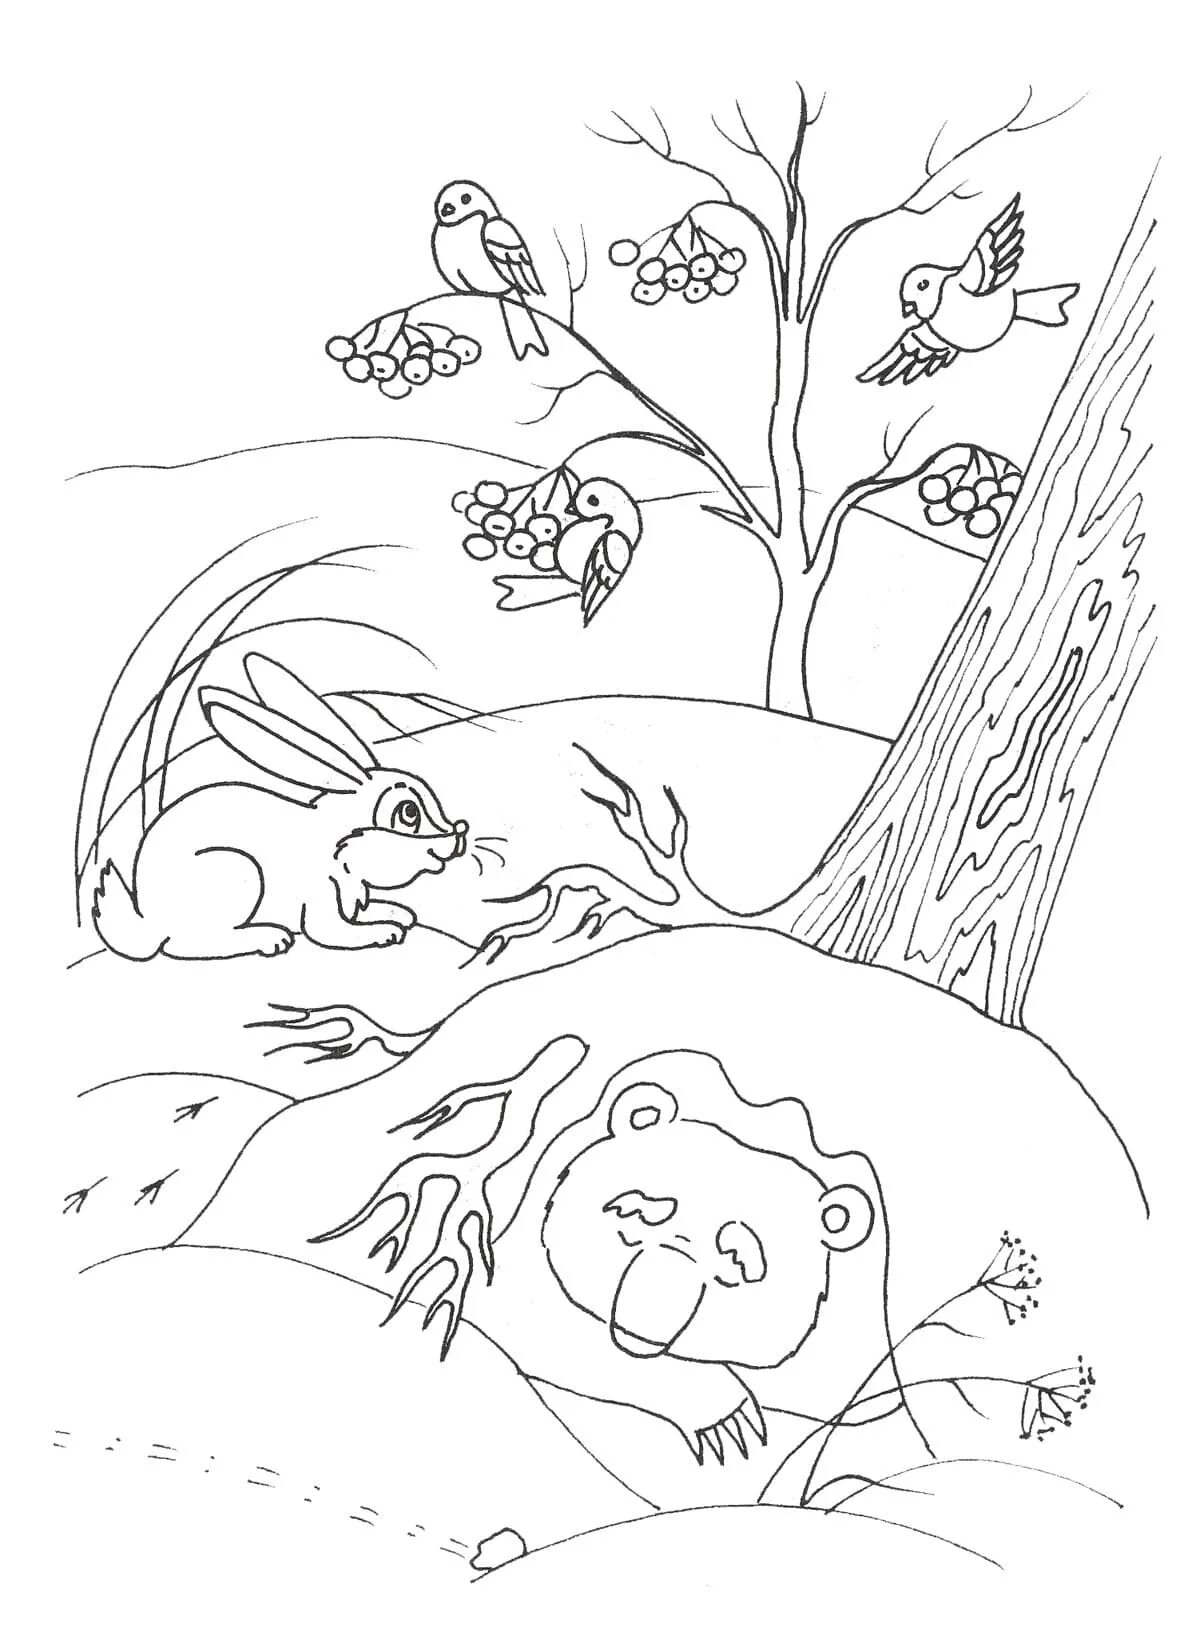 Frozen coloring page bear in winter